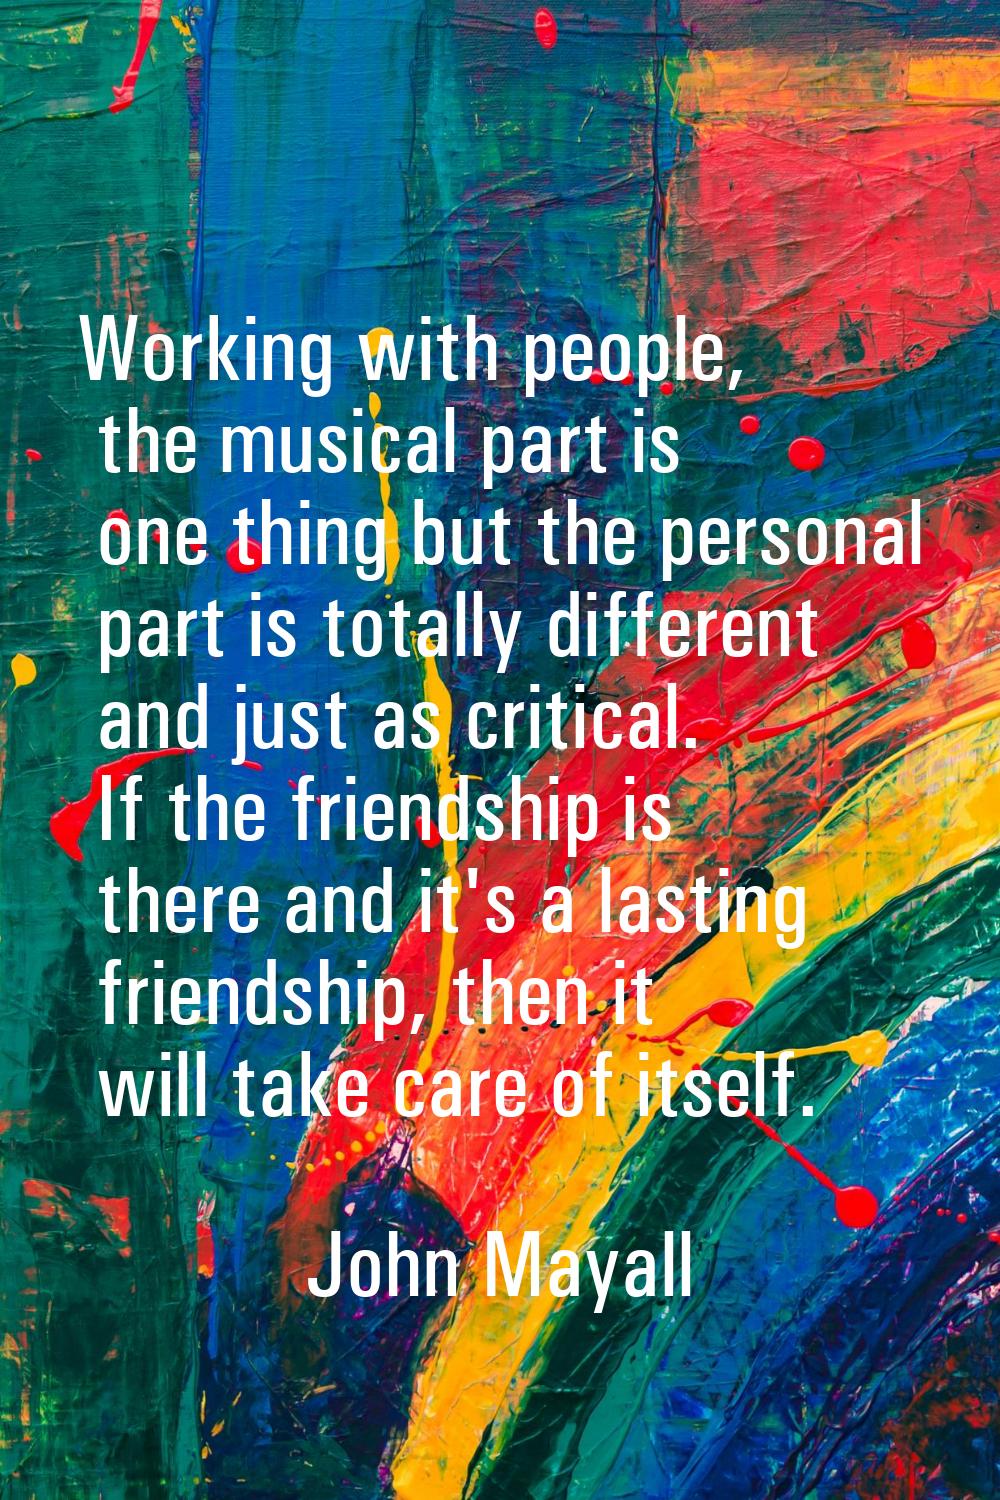 Working with people, the musical part is one thing but the personal part is totally different and j